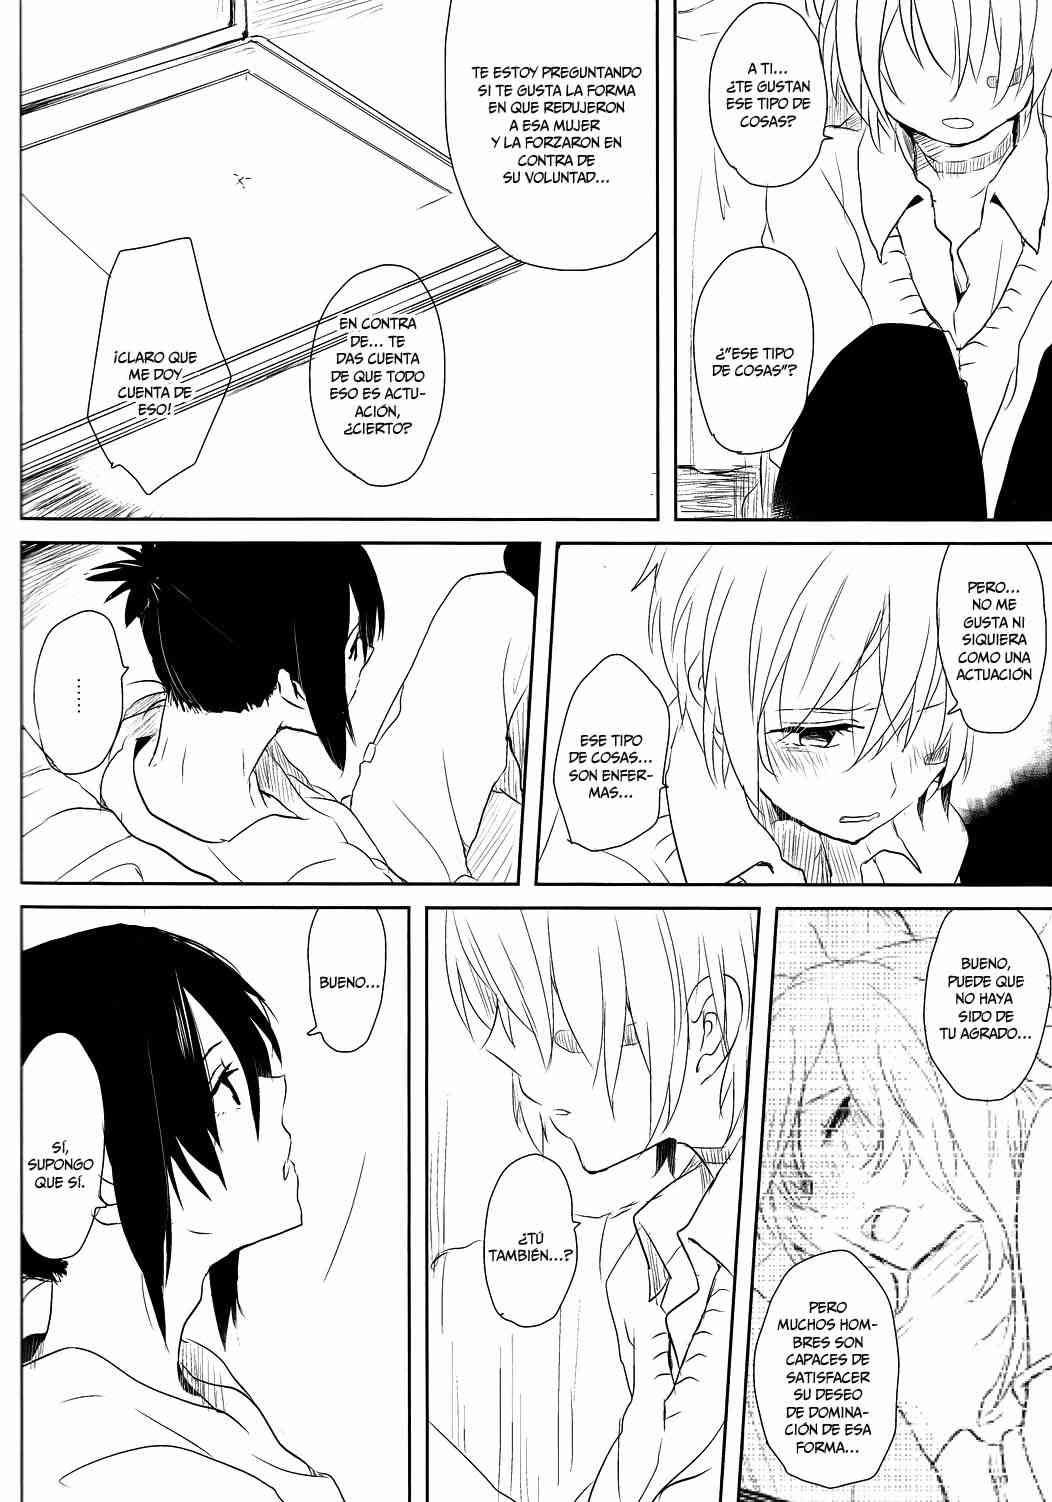 Doujinshi No.6 Determine Your Desire, then Do It Chapter-1 - 16